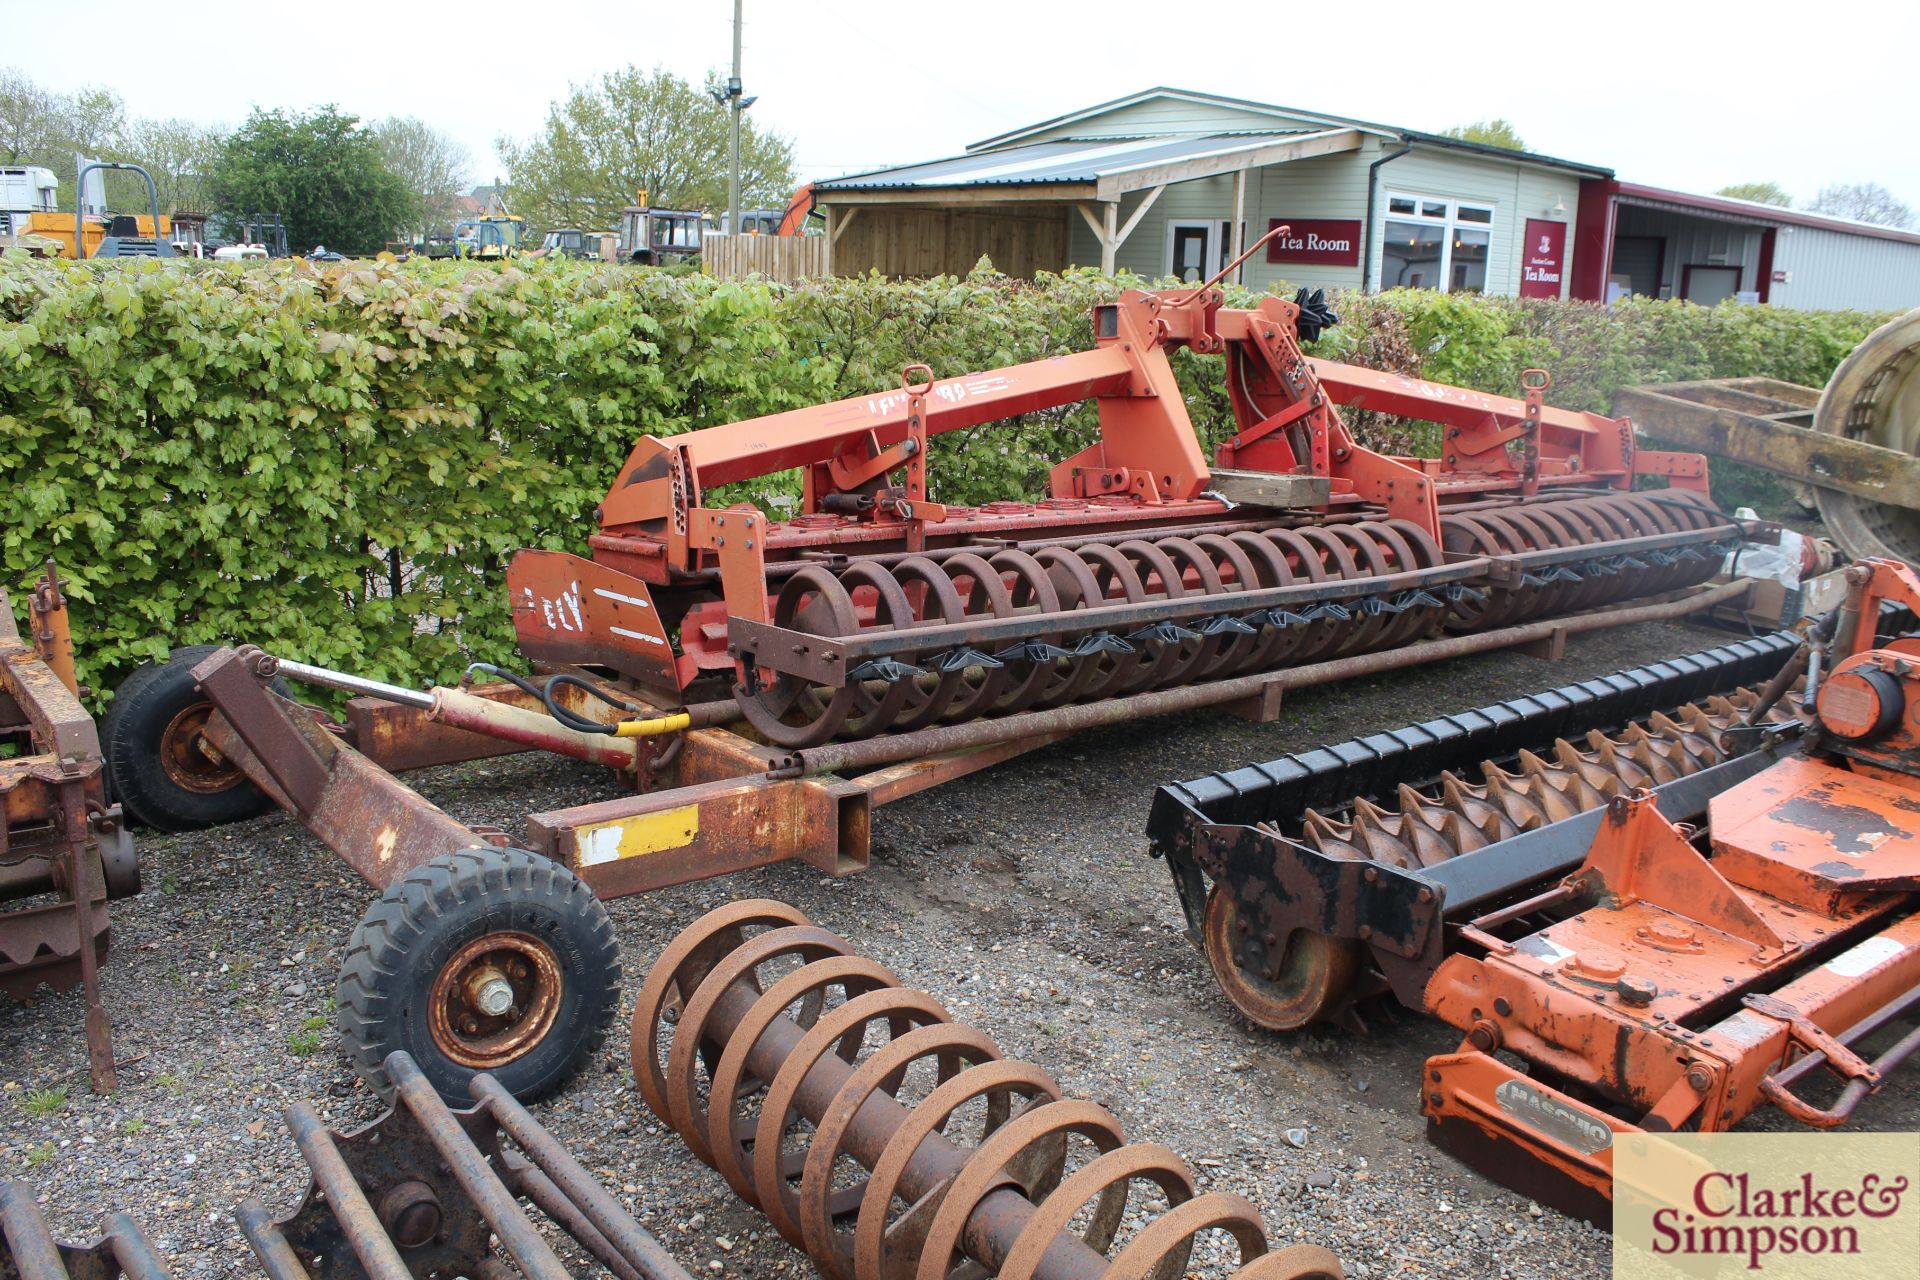 Lely 5m rigid power harrow. With crumbler and transport trailer. Vendor reports that a seal has gone